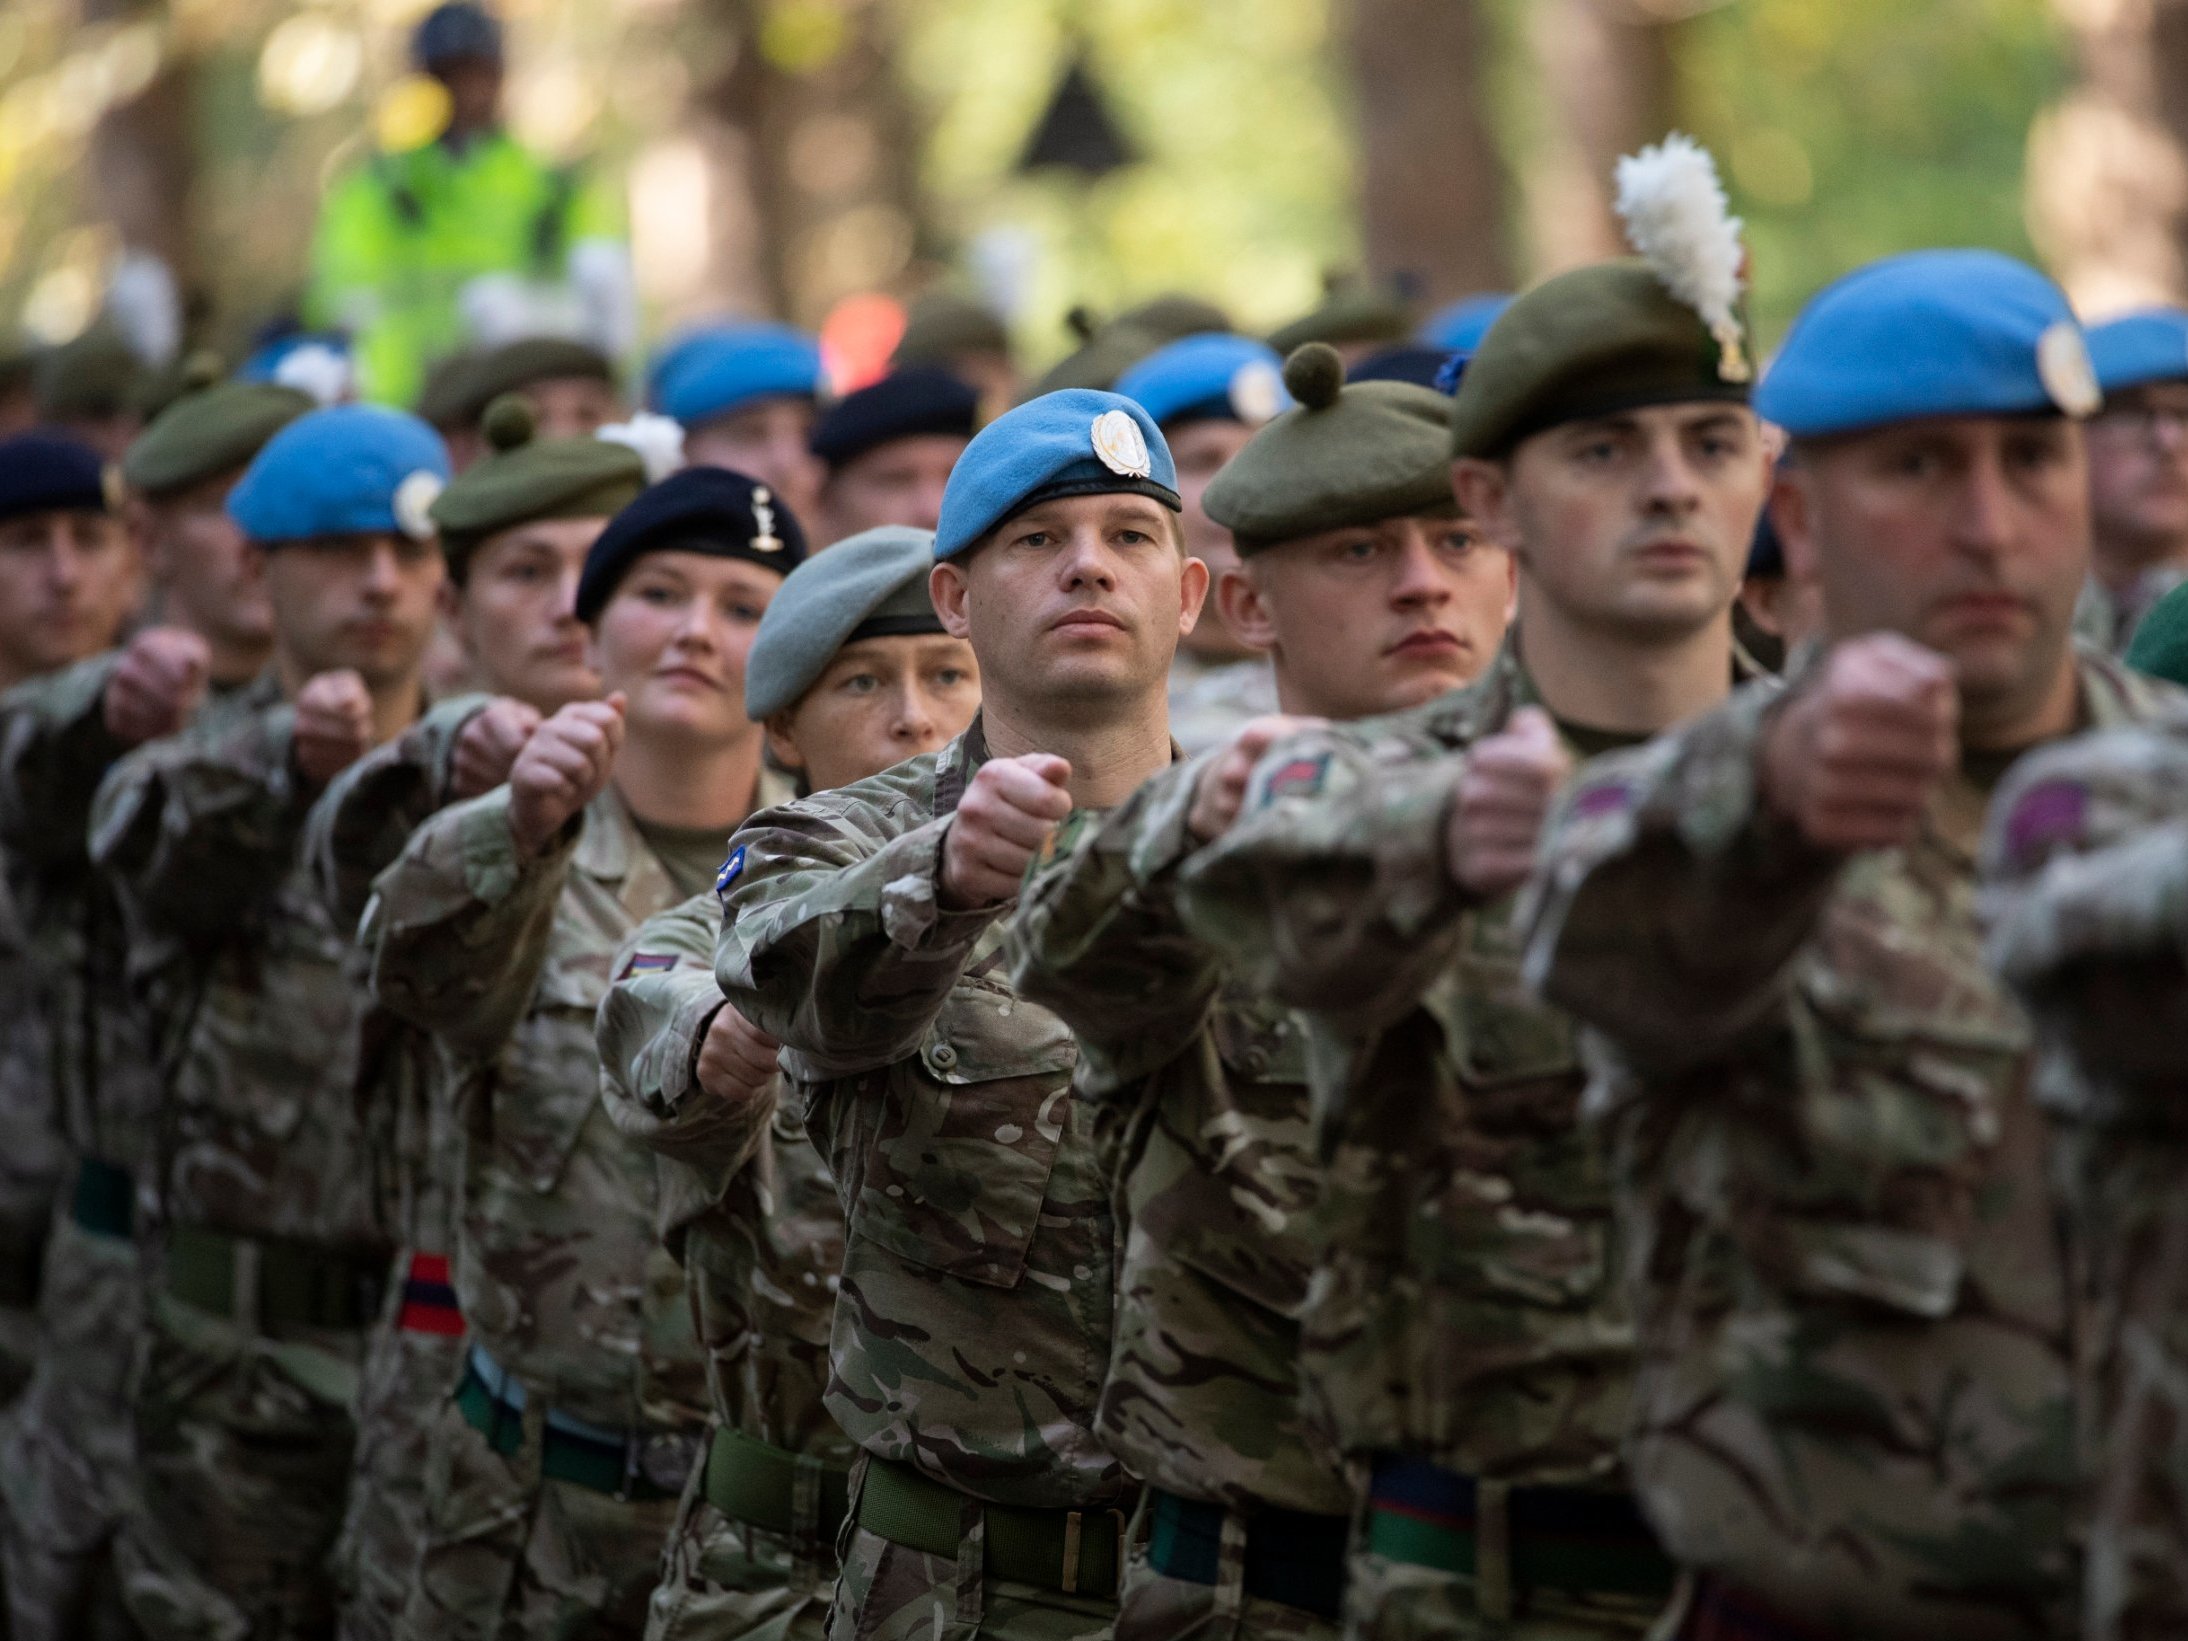 British Army to recruit foreigners from 53 commonwealth nations amidst personnel shortage